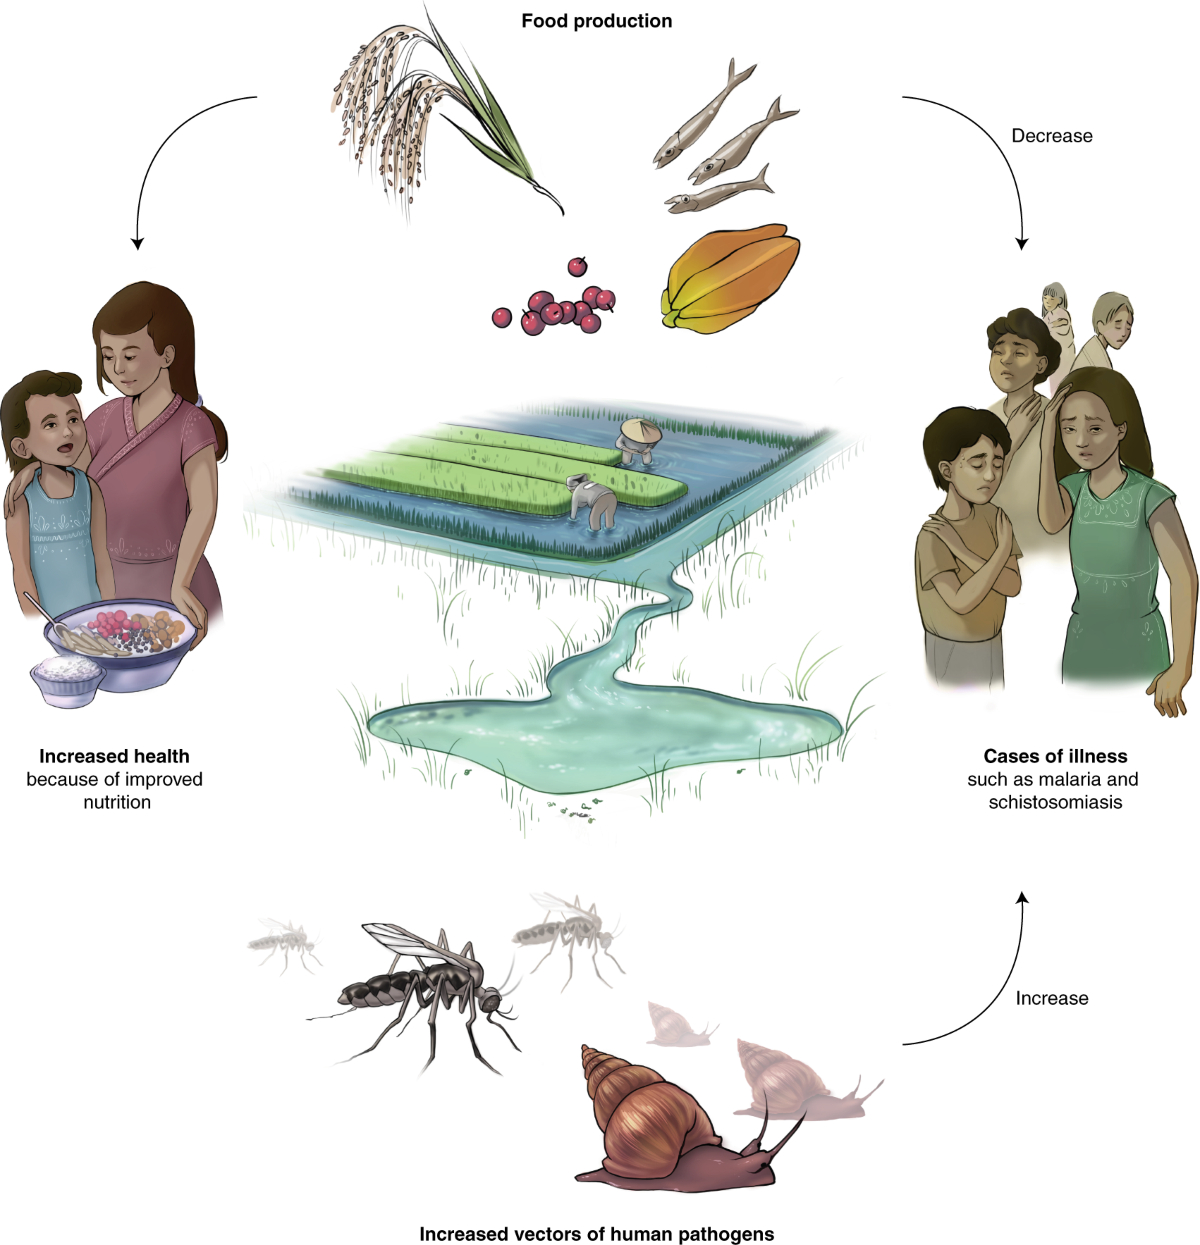 Emerging human infectious diseases and the links to global food